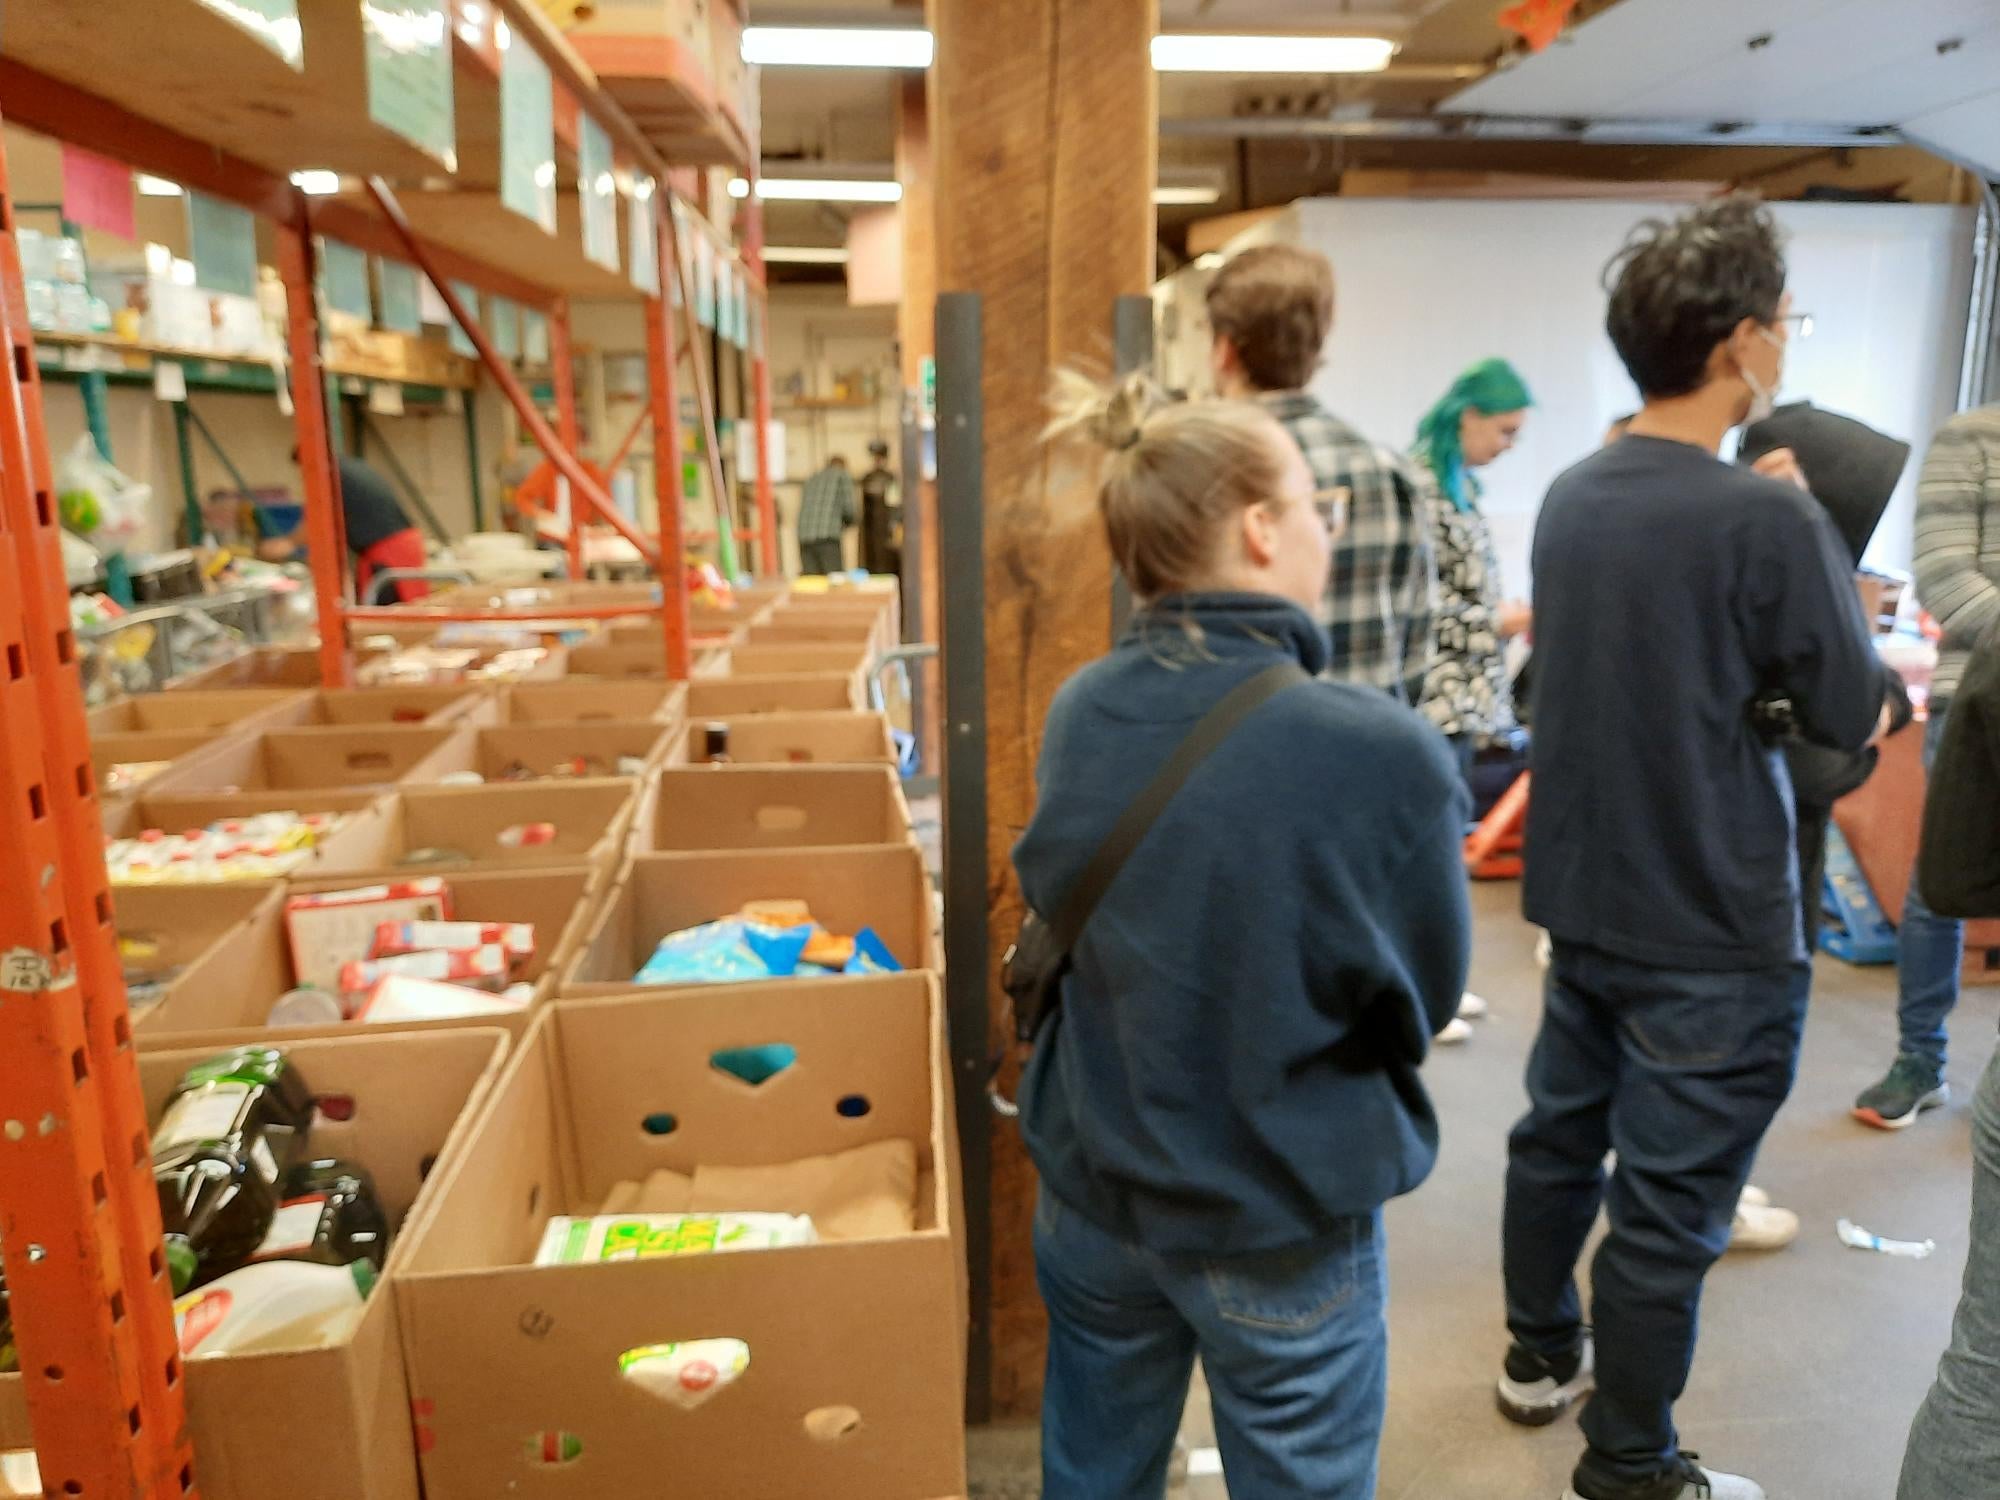 The distribution centre containing boxes of sorted food at the Cambridge Food Bank